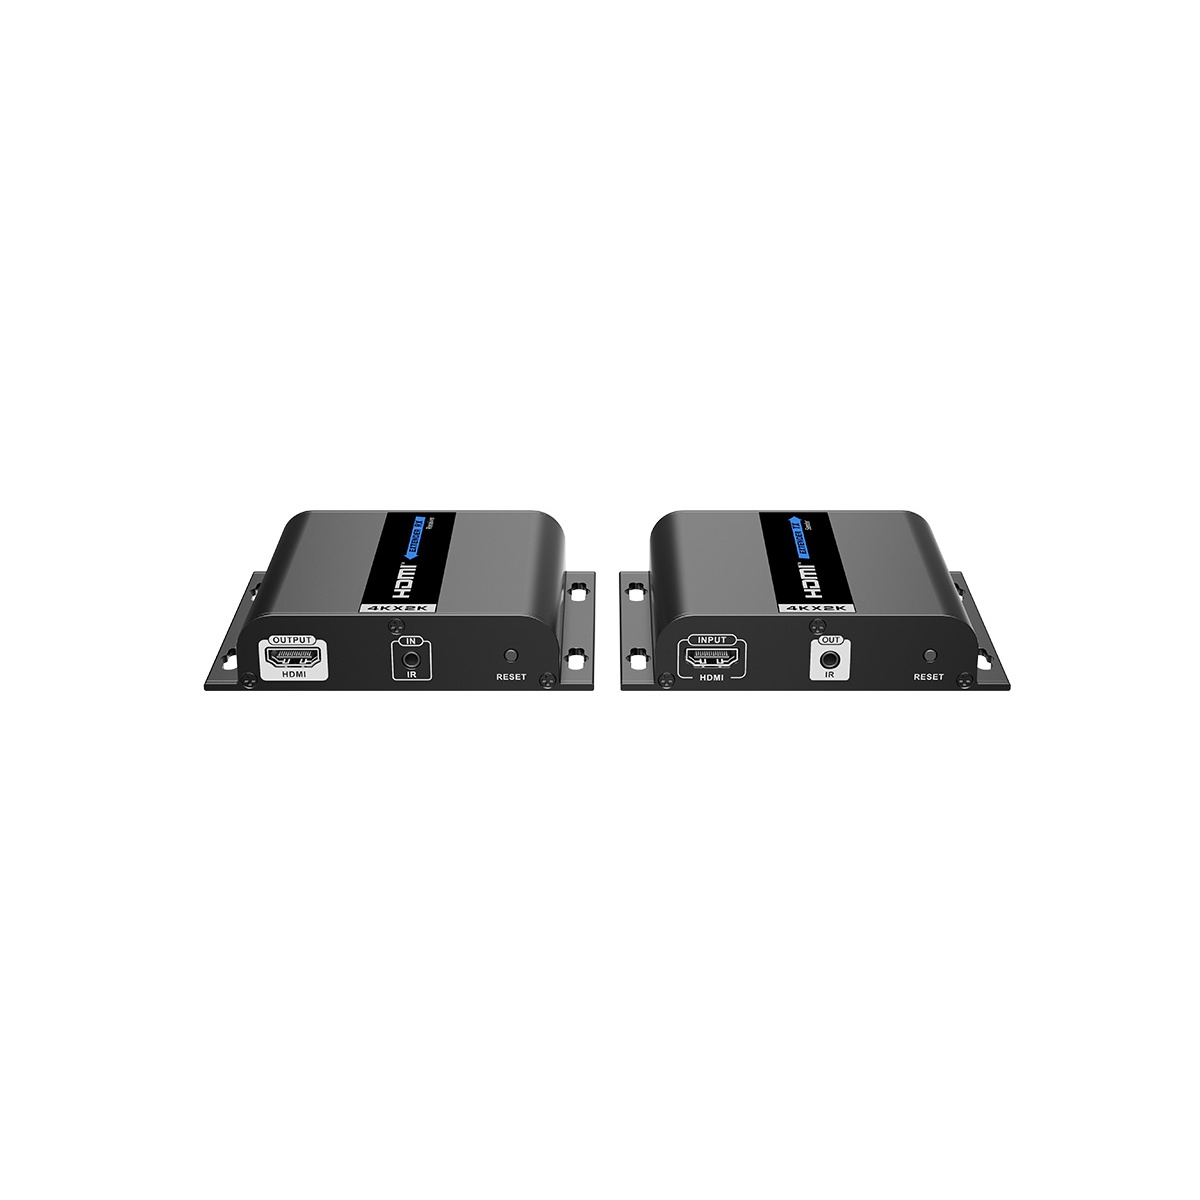 Lenkeng LKV683-4.0 HDMI extender over LAN 4K30Hz up to 120M with IR (RX ONLY)